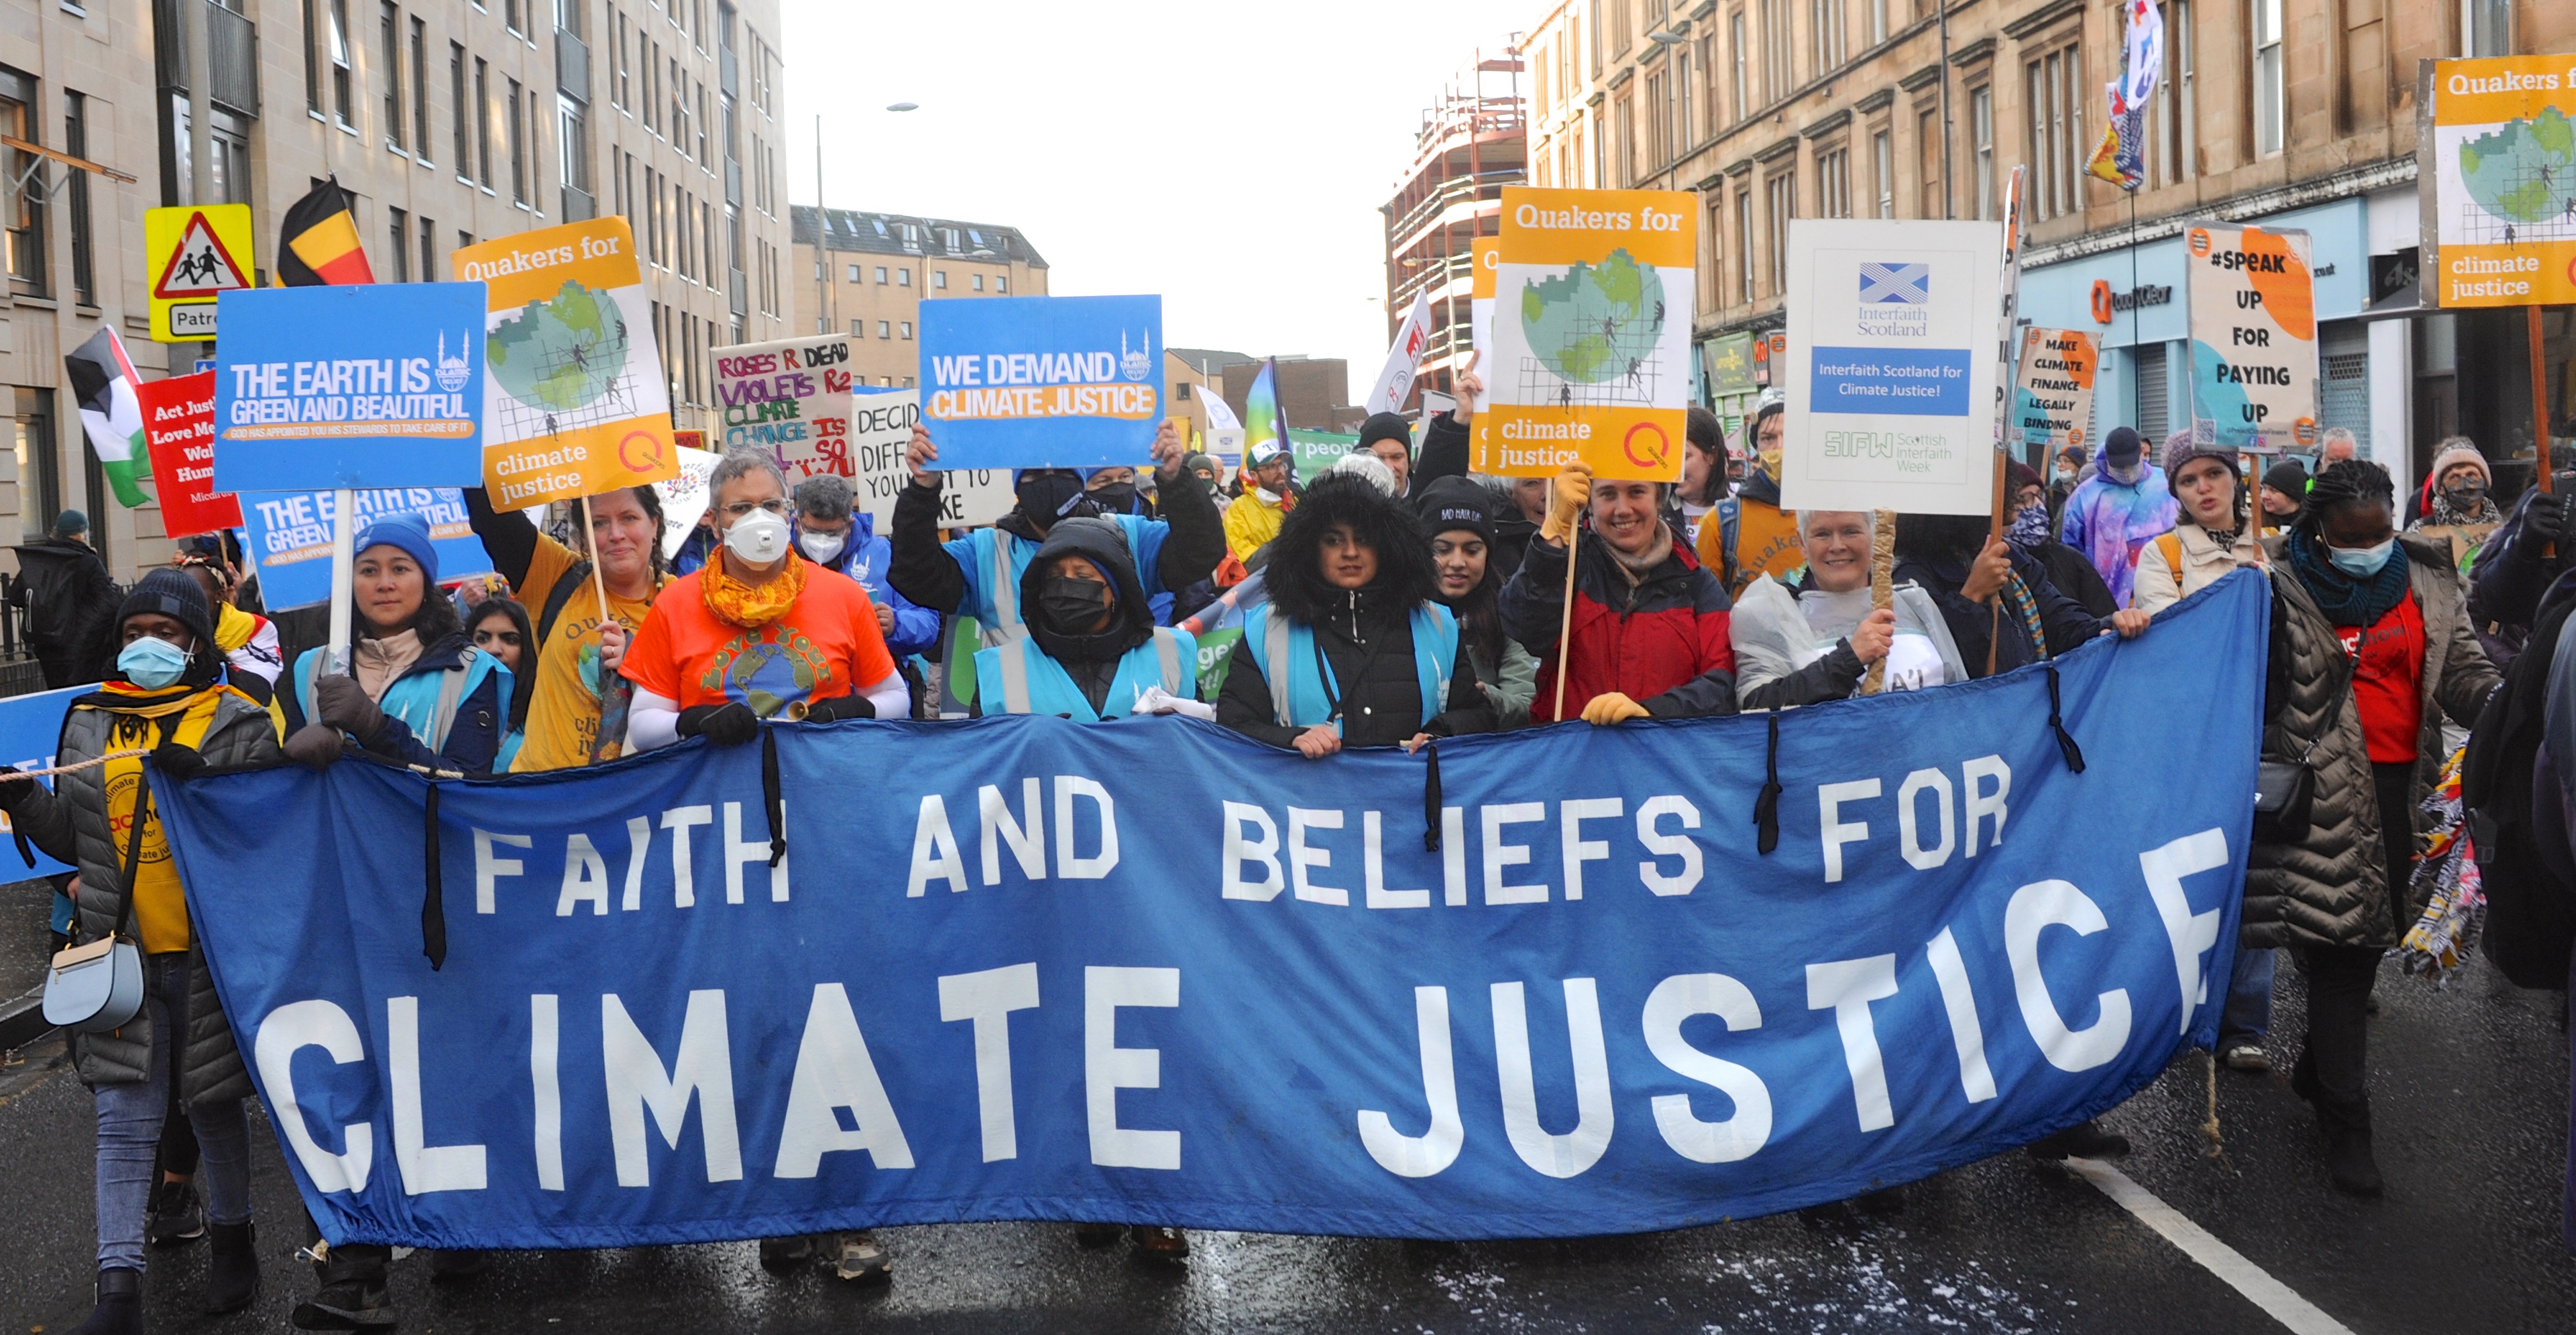 Faith leaders gathered on the street with a banner for climate justice